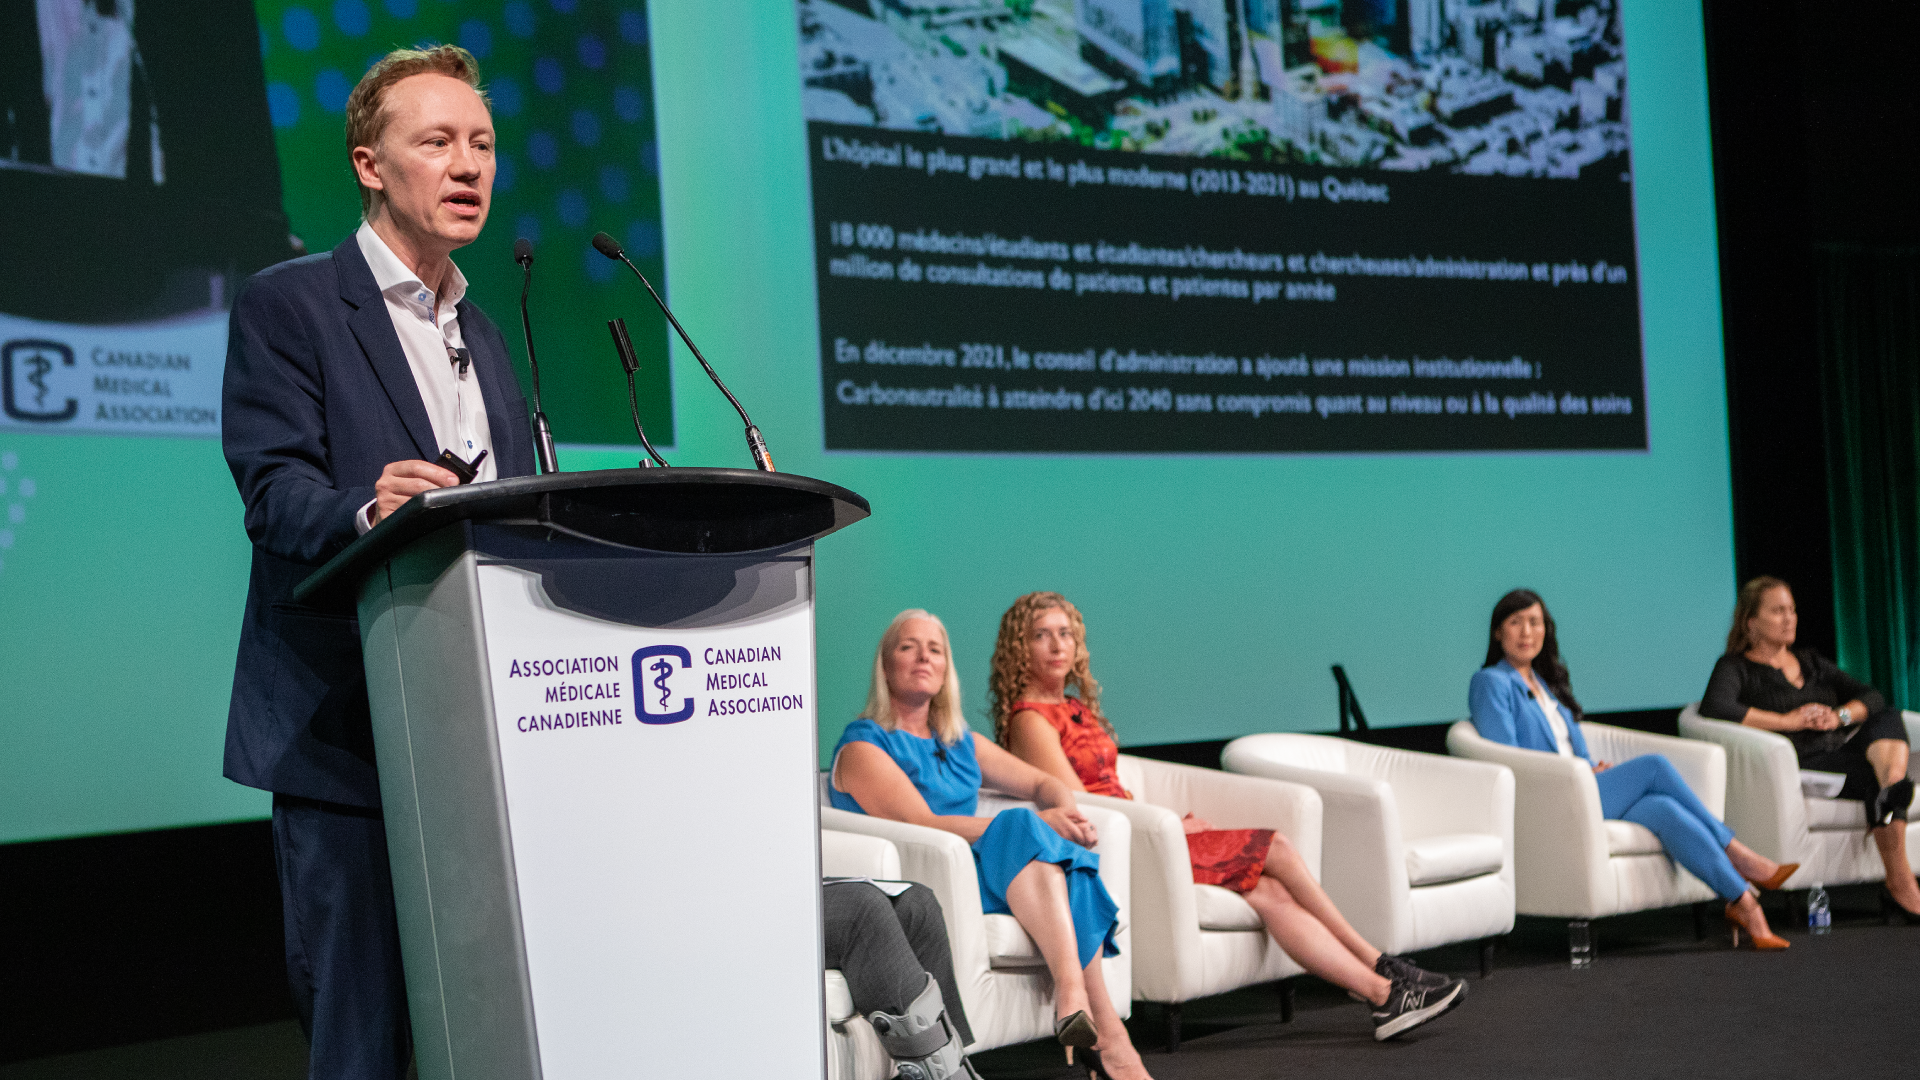 The host and participants of a panel on net-zero, climate-resilient health care at the CMA Health Summit. From left to right: host Adrian Harewood, the Hon. Catherine McKenna, Dr. Courtney Howard, Dr. Stephan Williams, Dr. Melissa Lem and Dr. Ojistoh Horn.